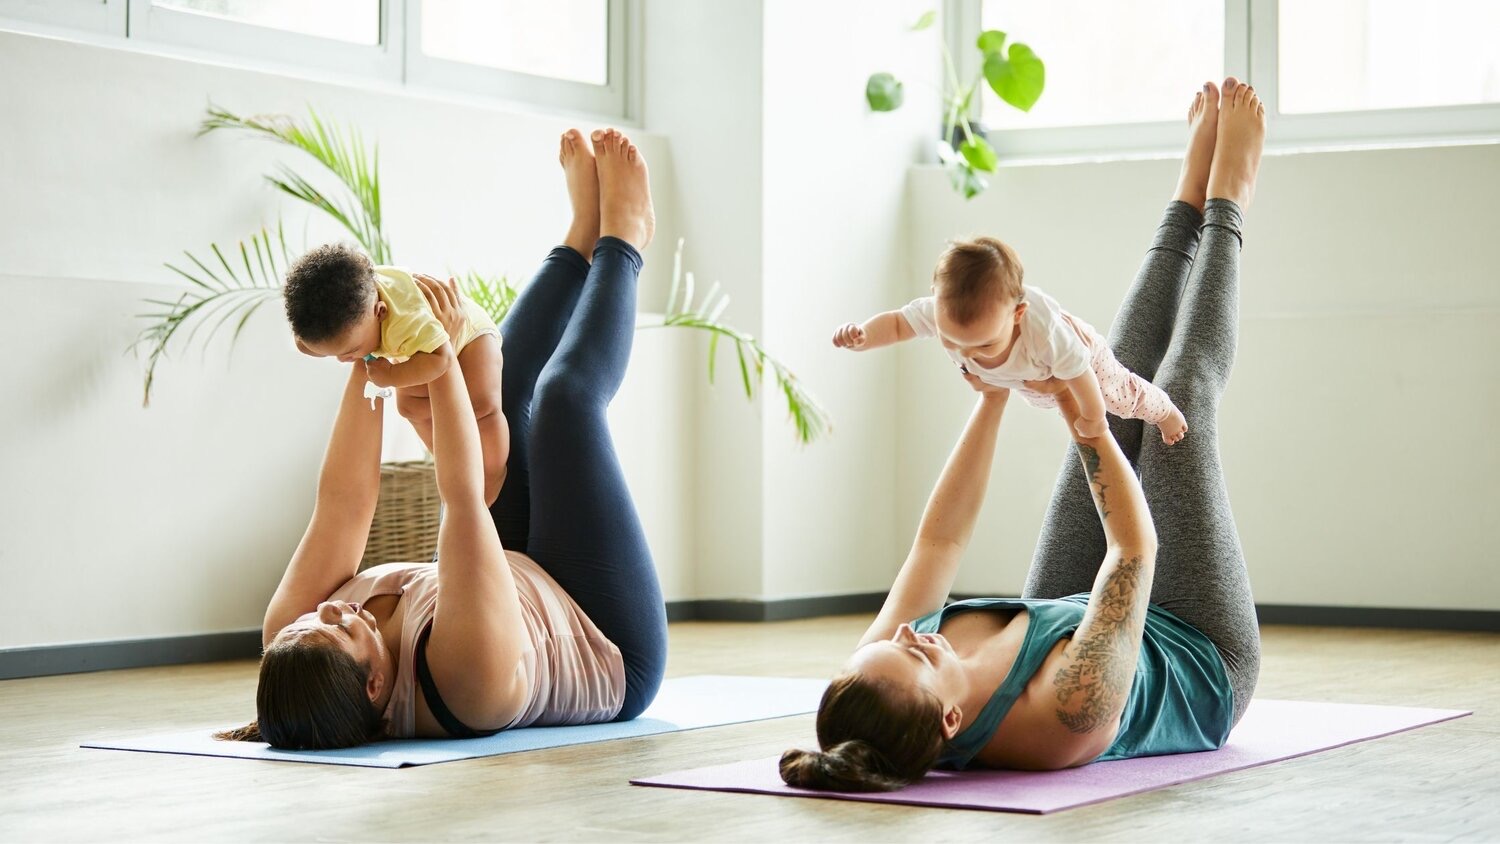 Why attend a mother and baby yoga class in person